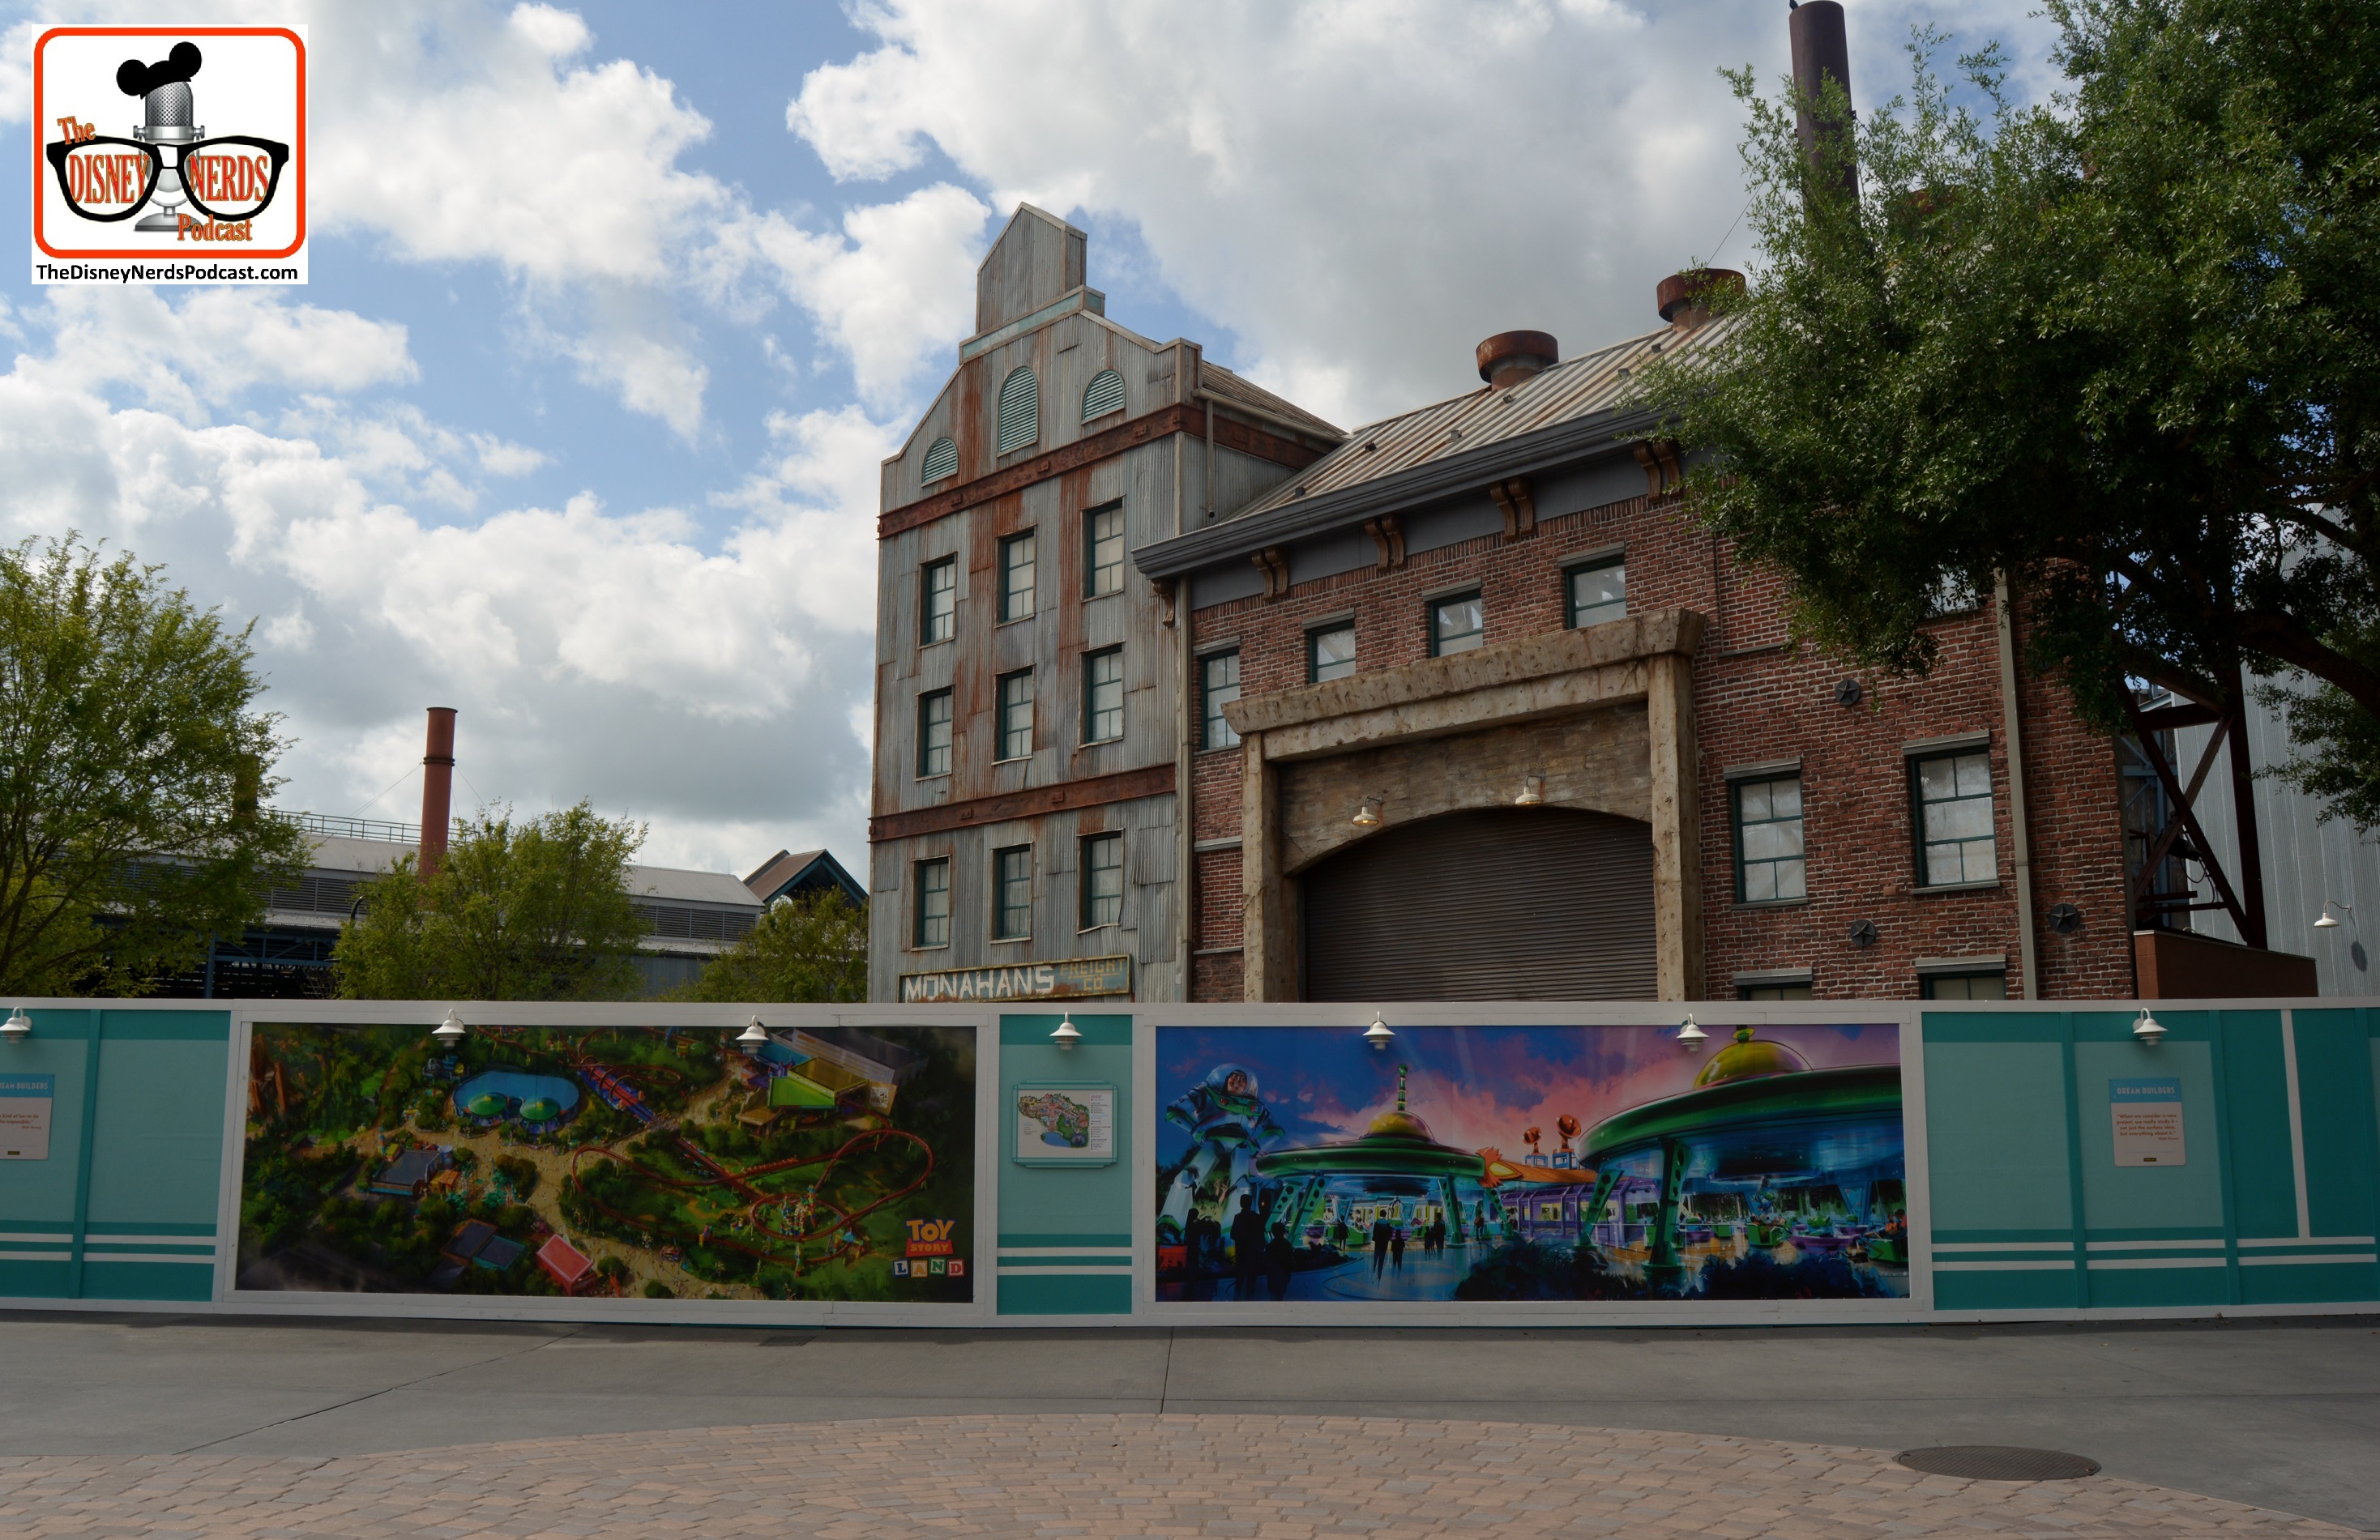 DNP April 2016 Photo Report: Hollywood Studios - Concept Art on Construction walls at the dead end past Toy Story mania